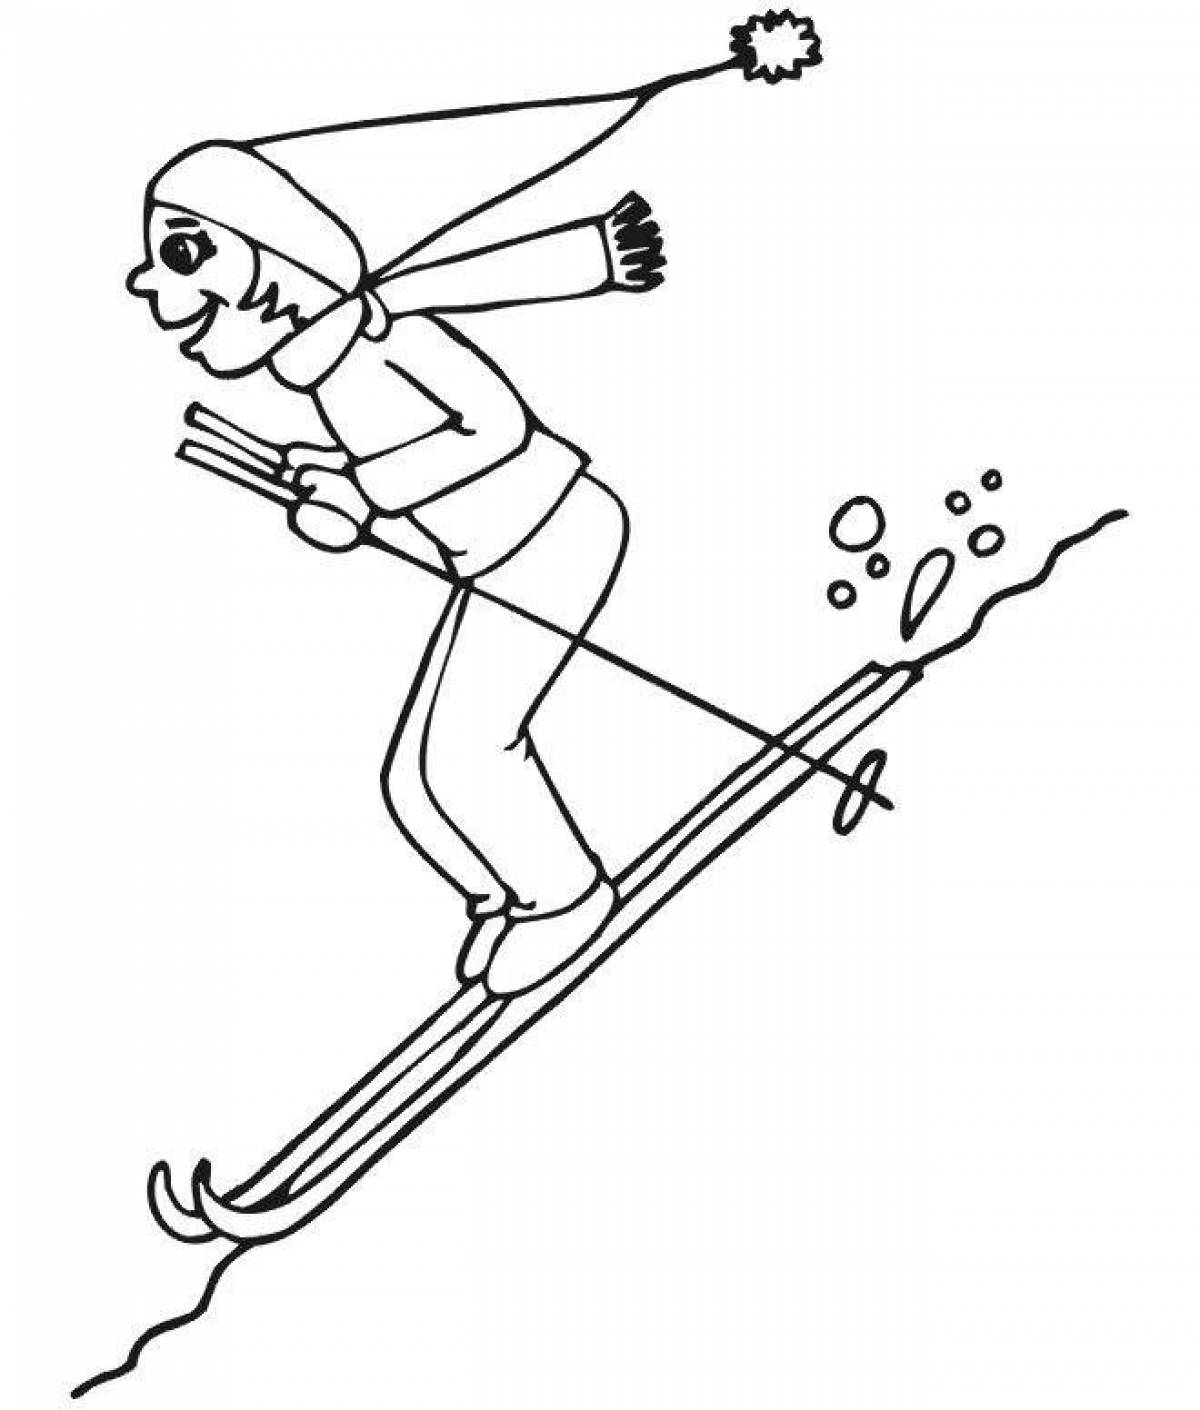 Playful skier coloring page